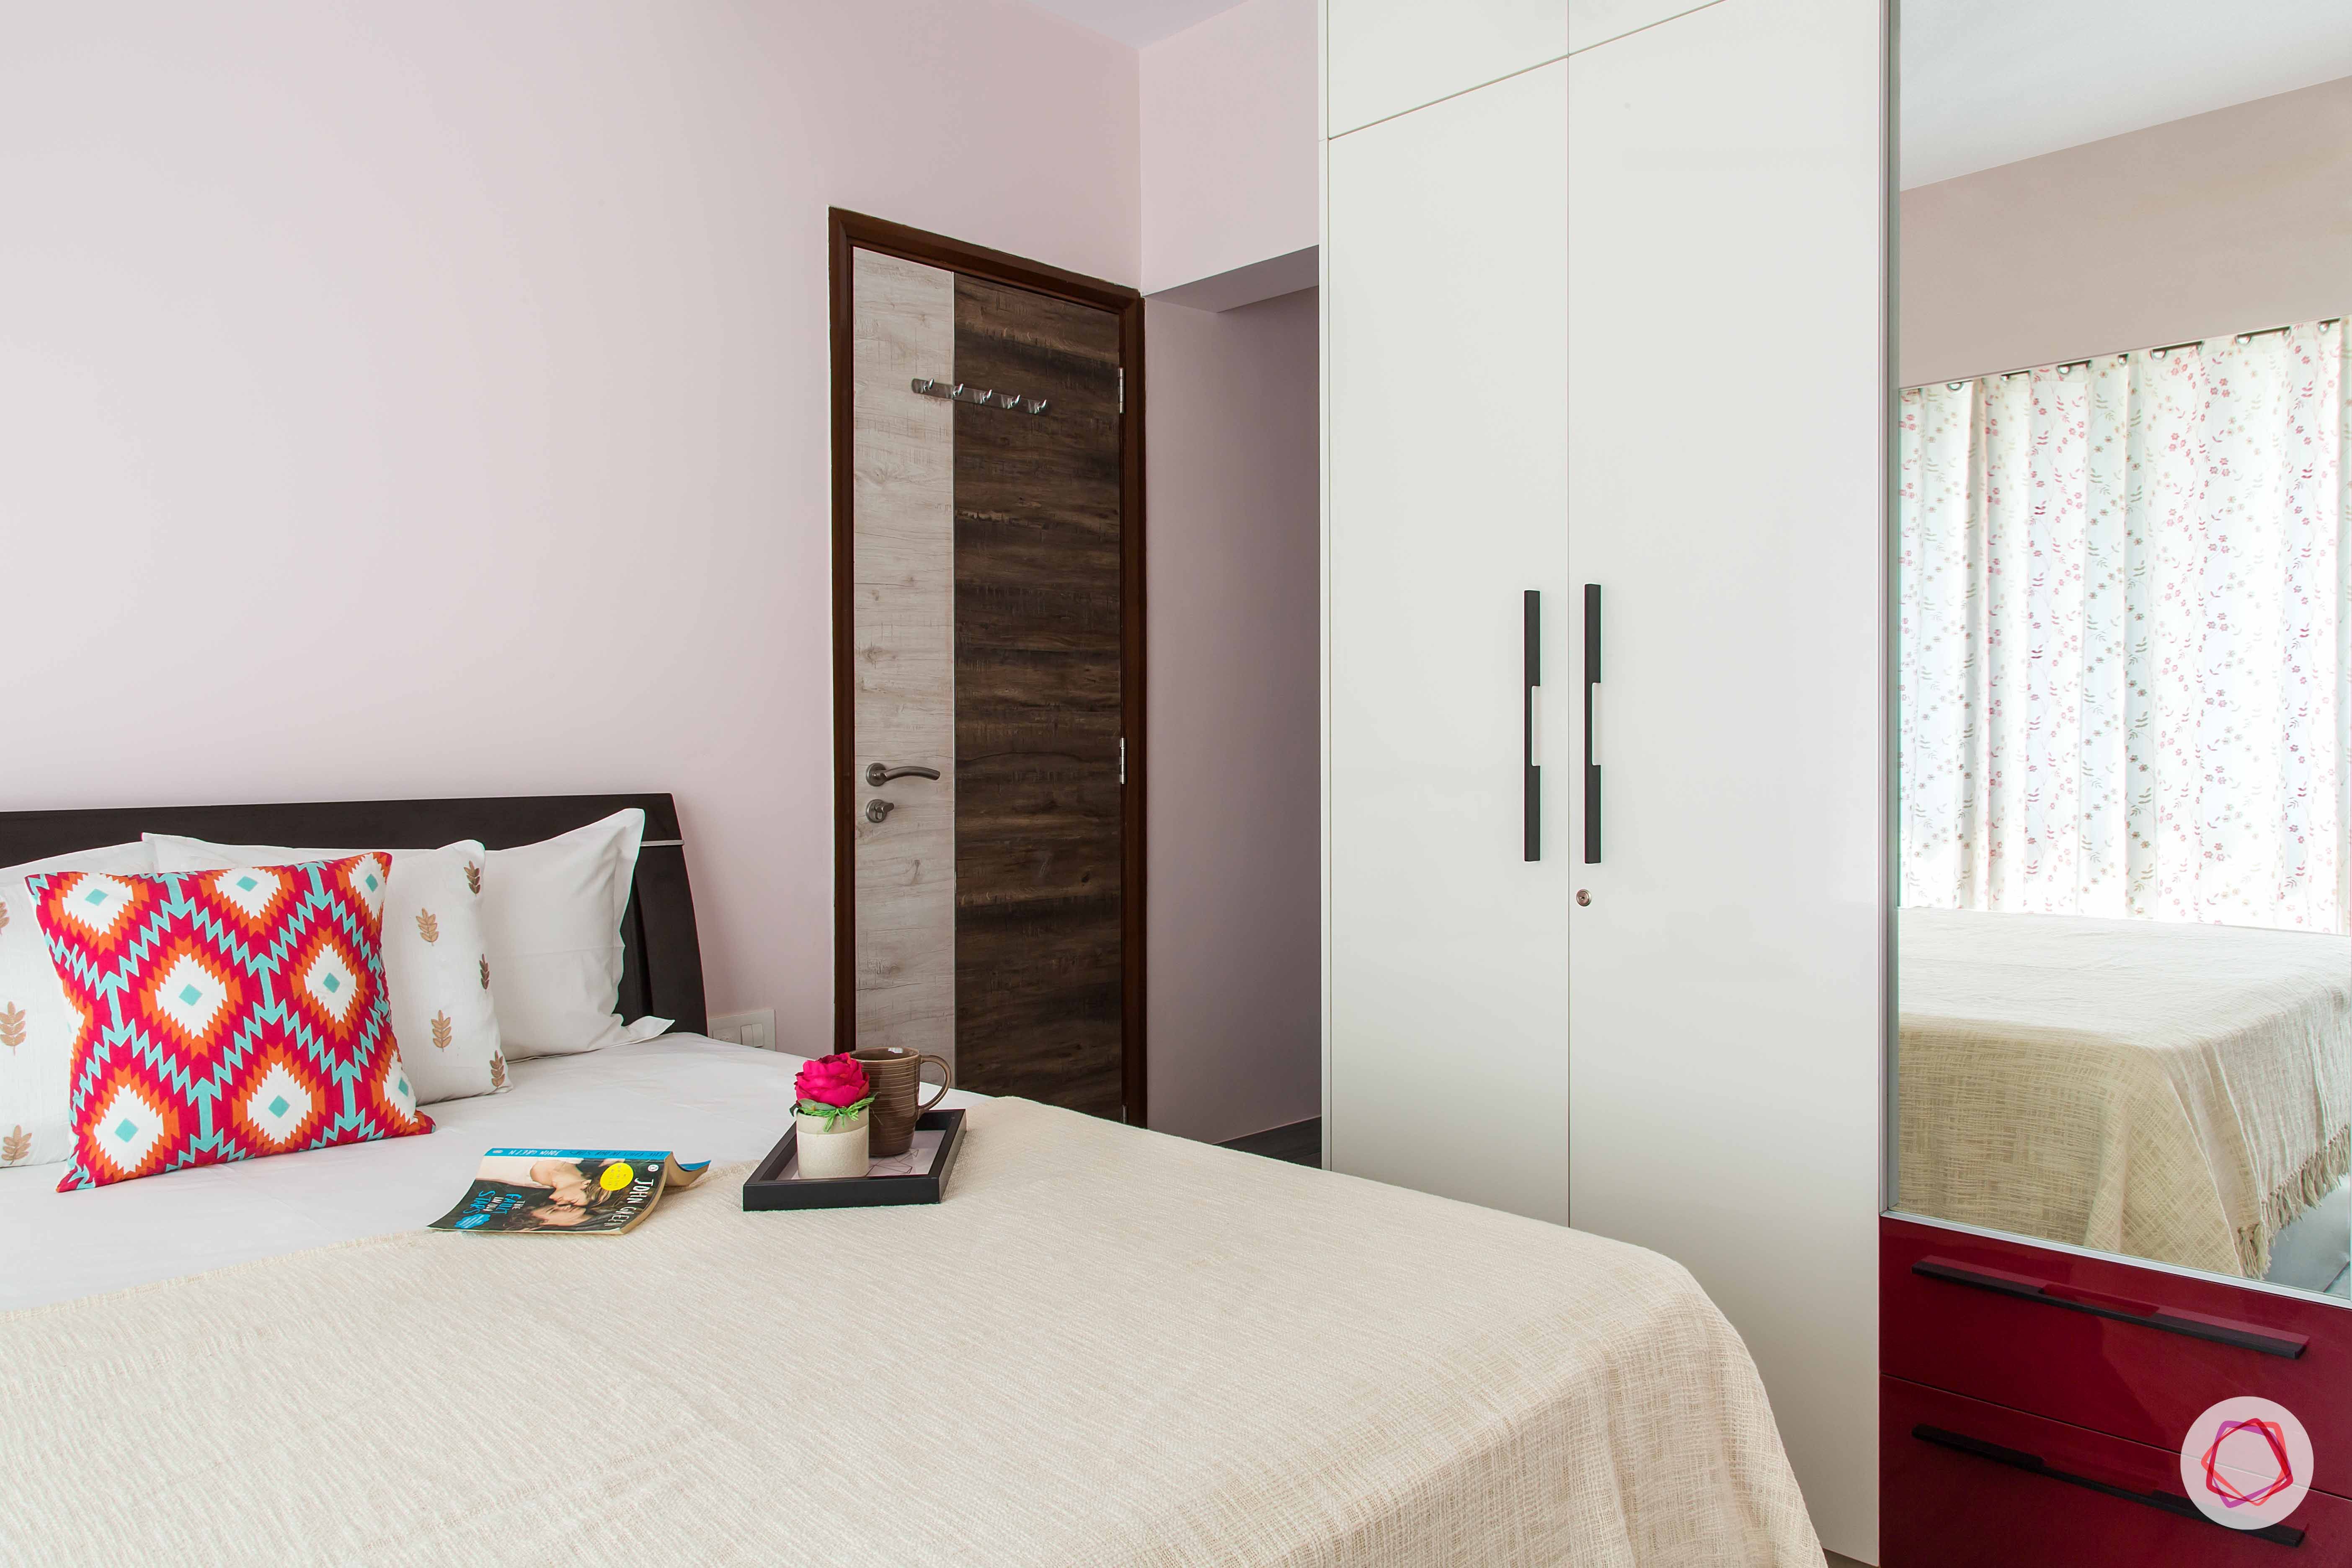 pink-white-bed-red-pillow-curtain-white-wardrobe
